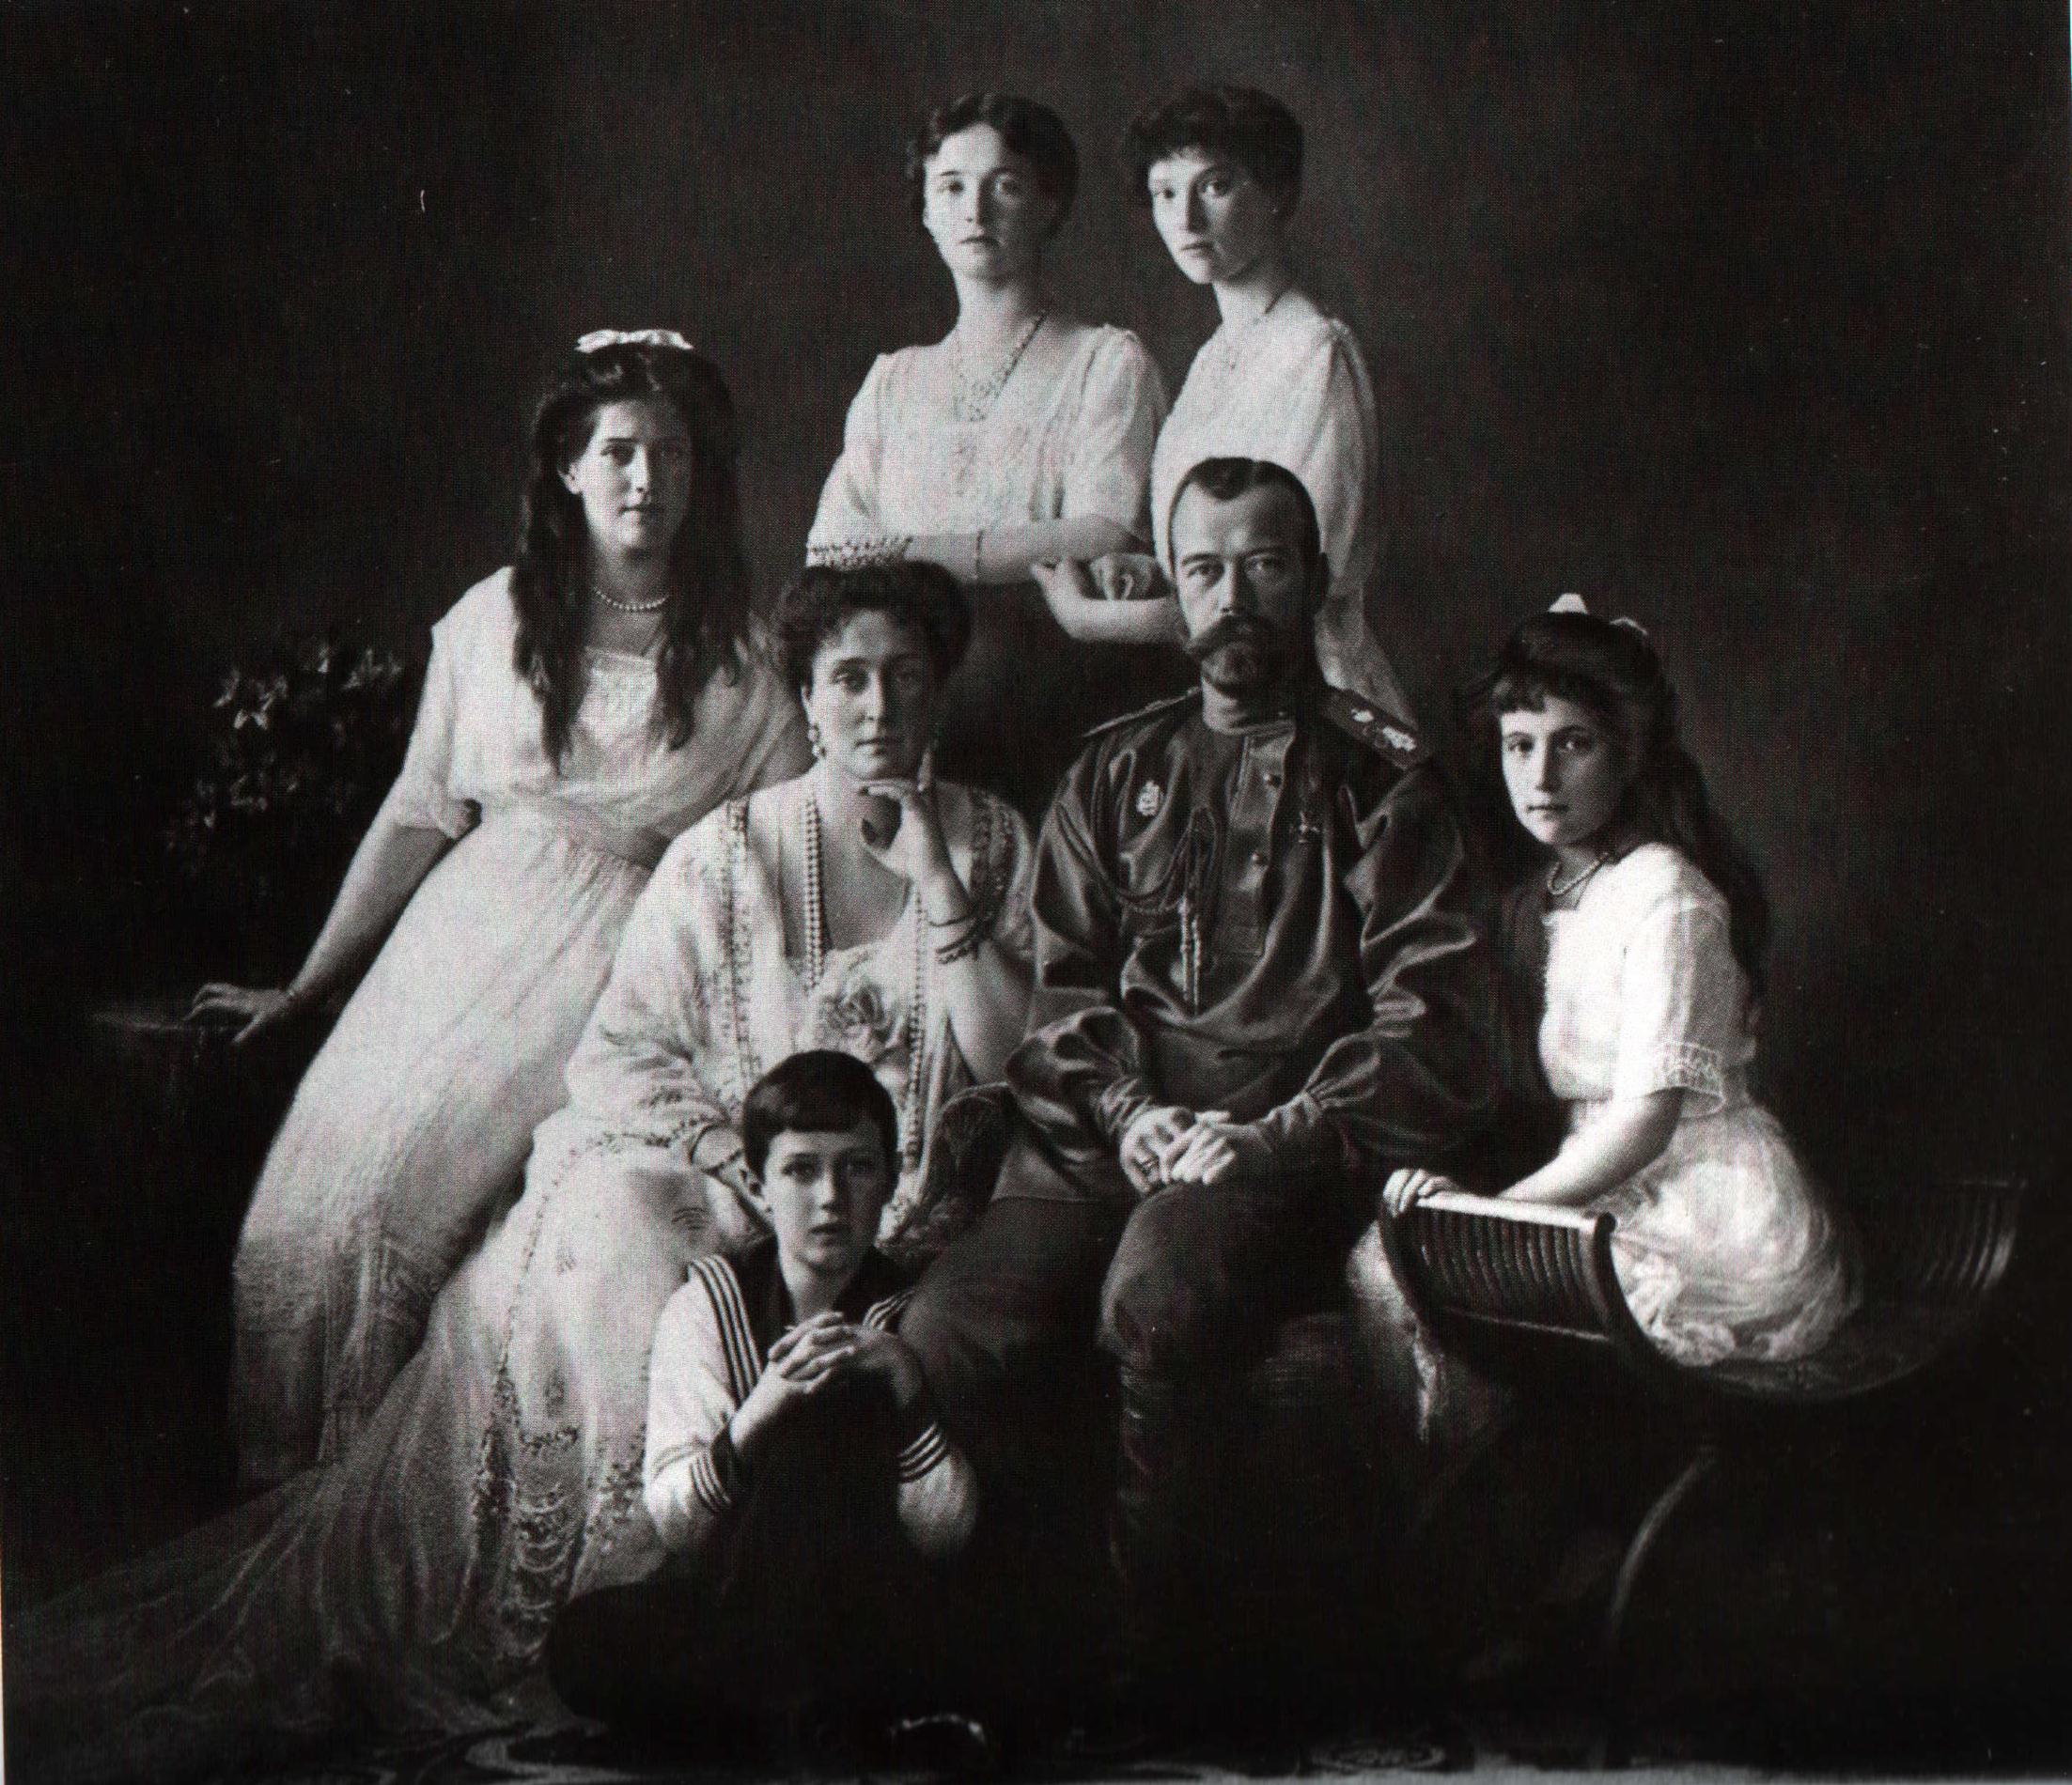 How Scientists Identified the Remains of the Romanovs